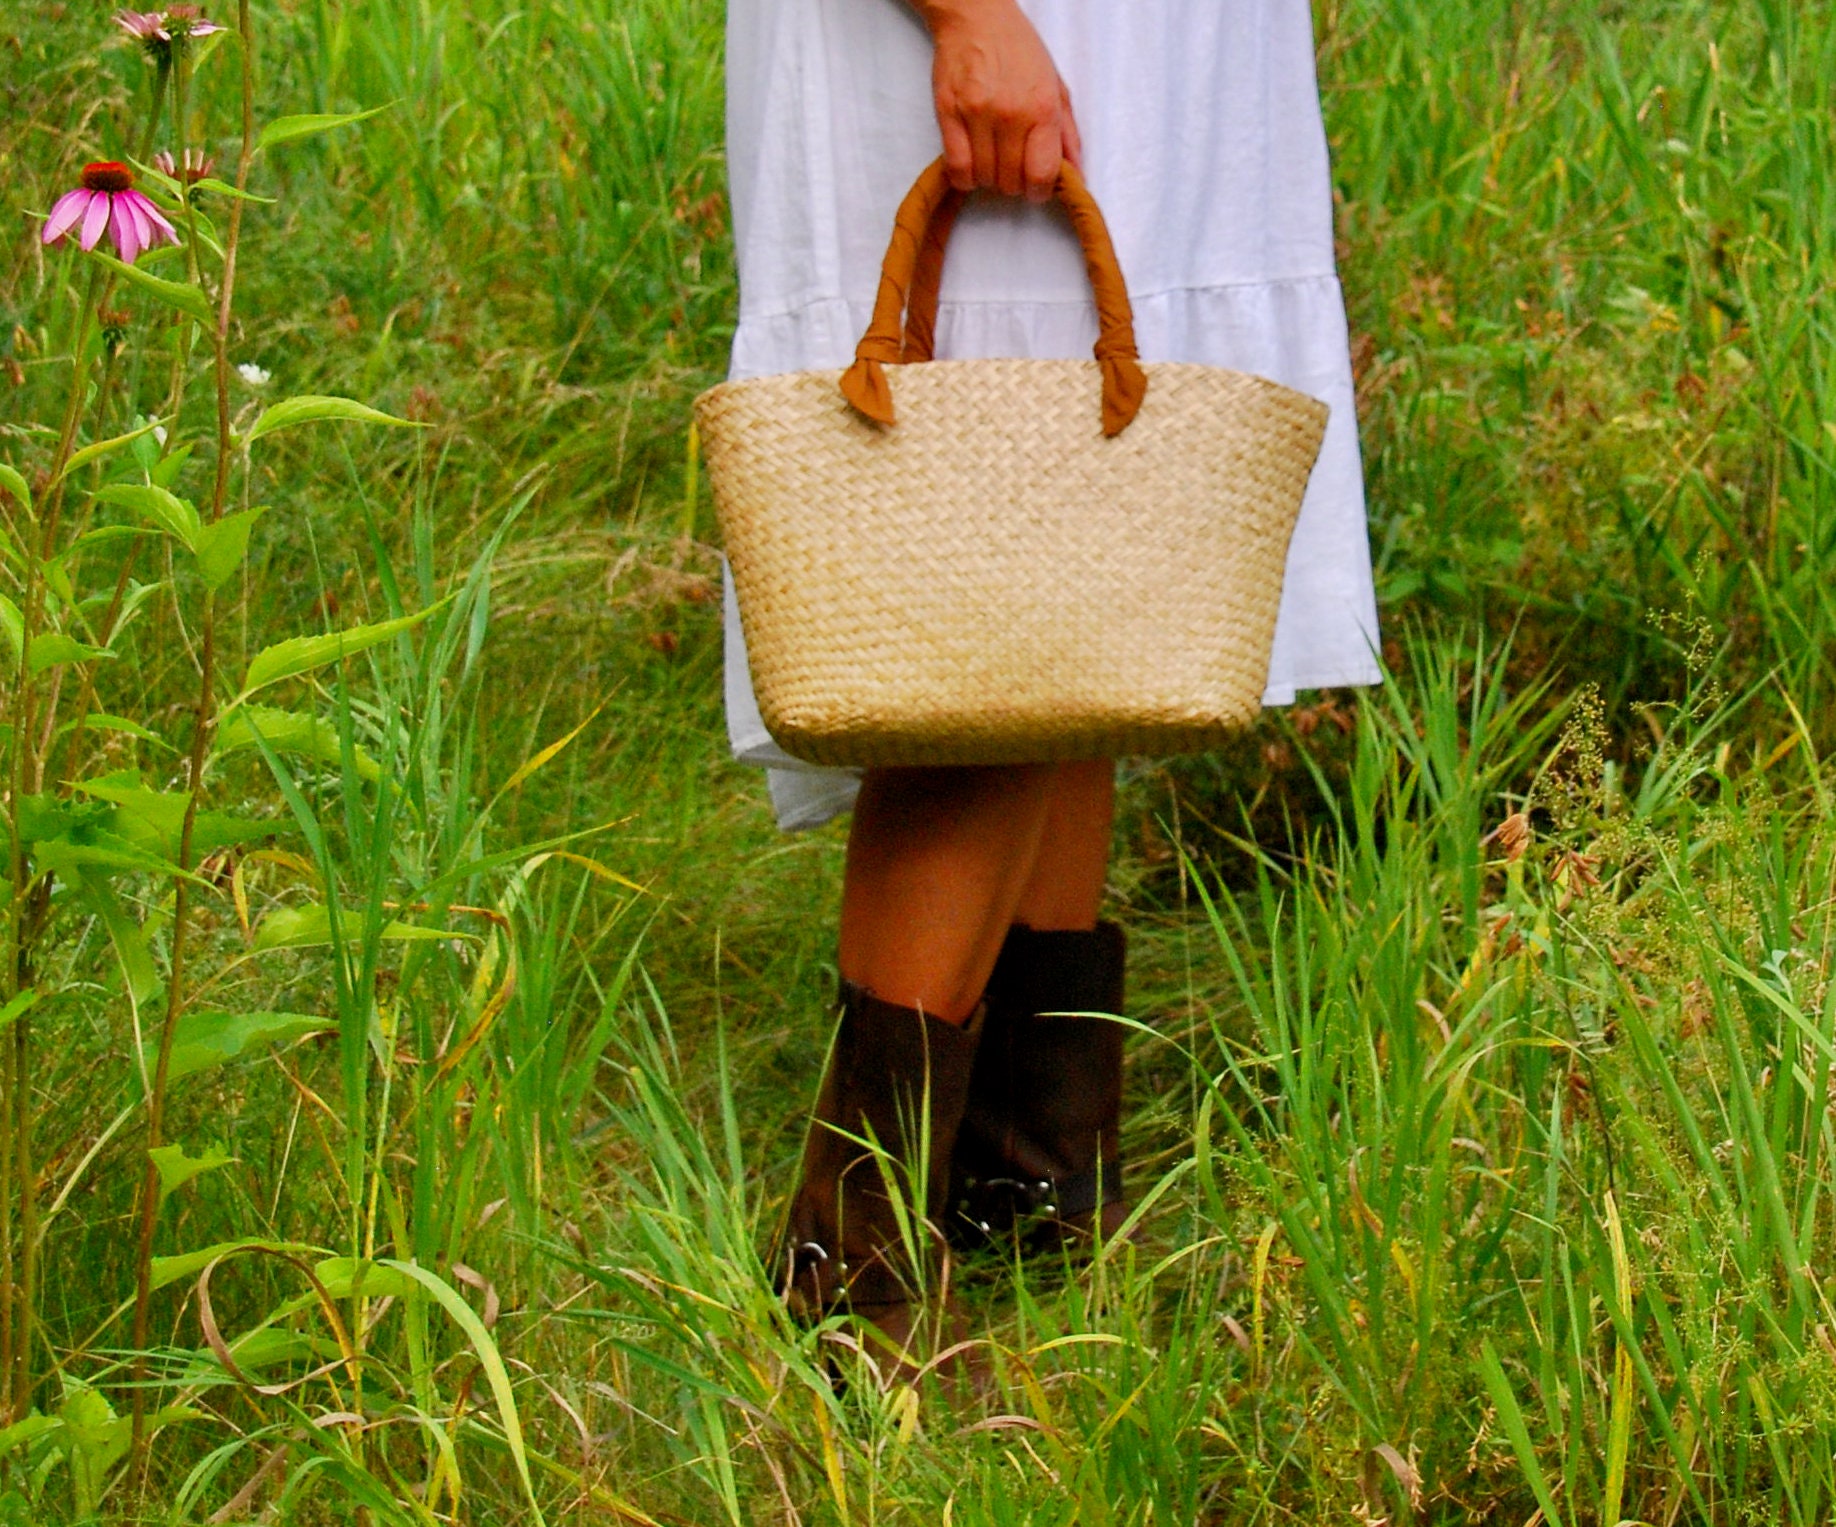 Stylish and Sustainable Moroccan Straw Tote Bag